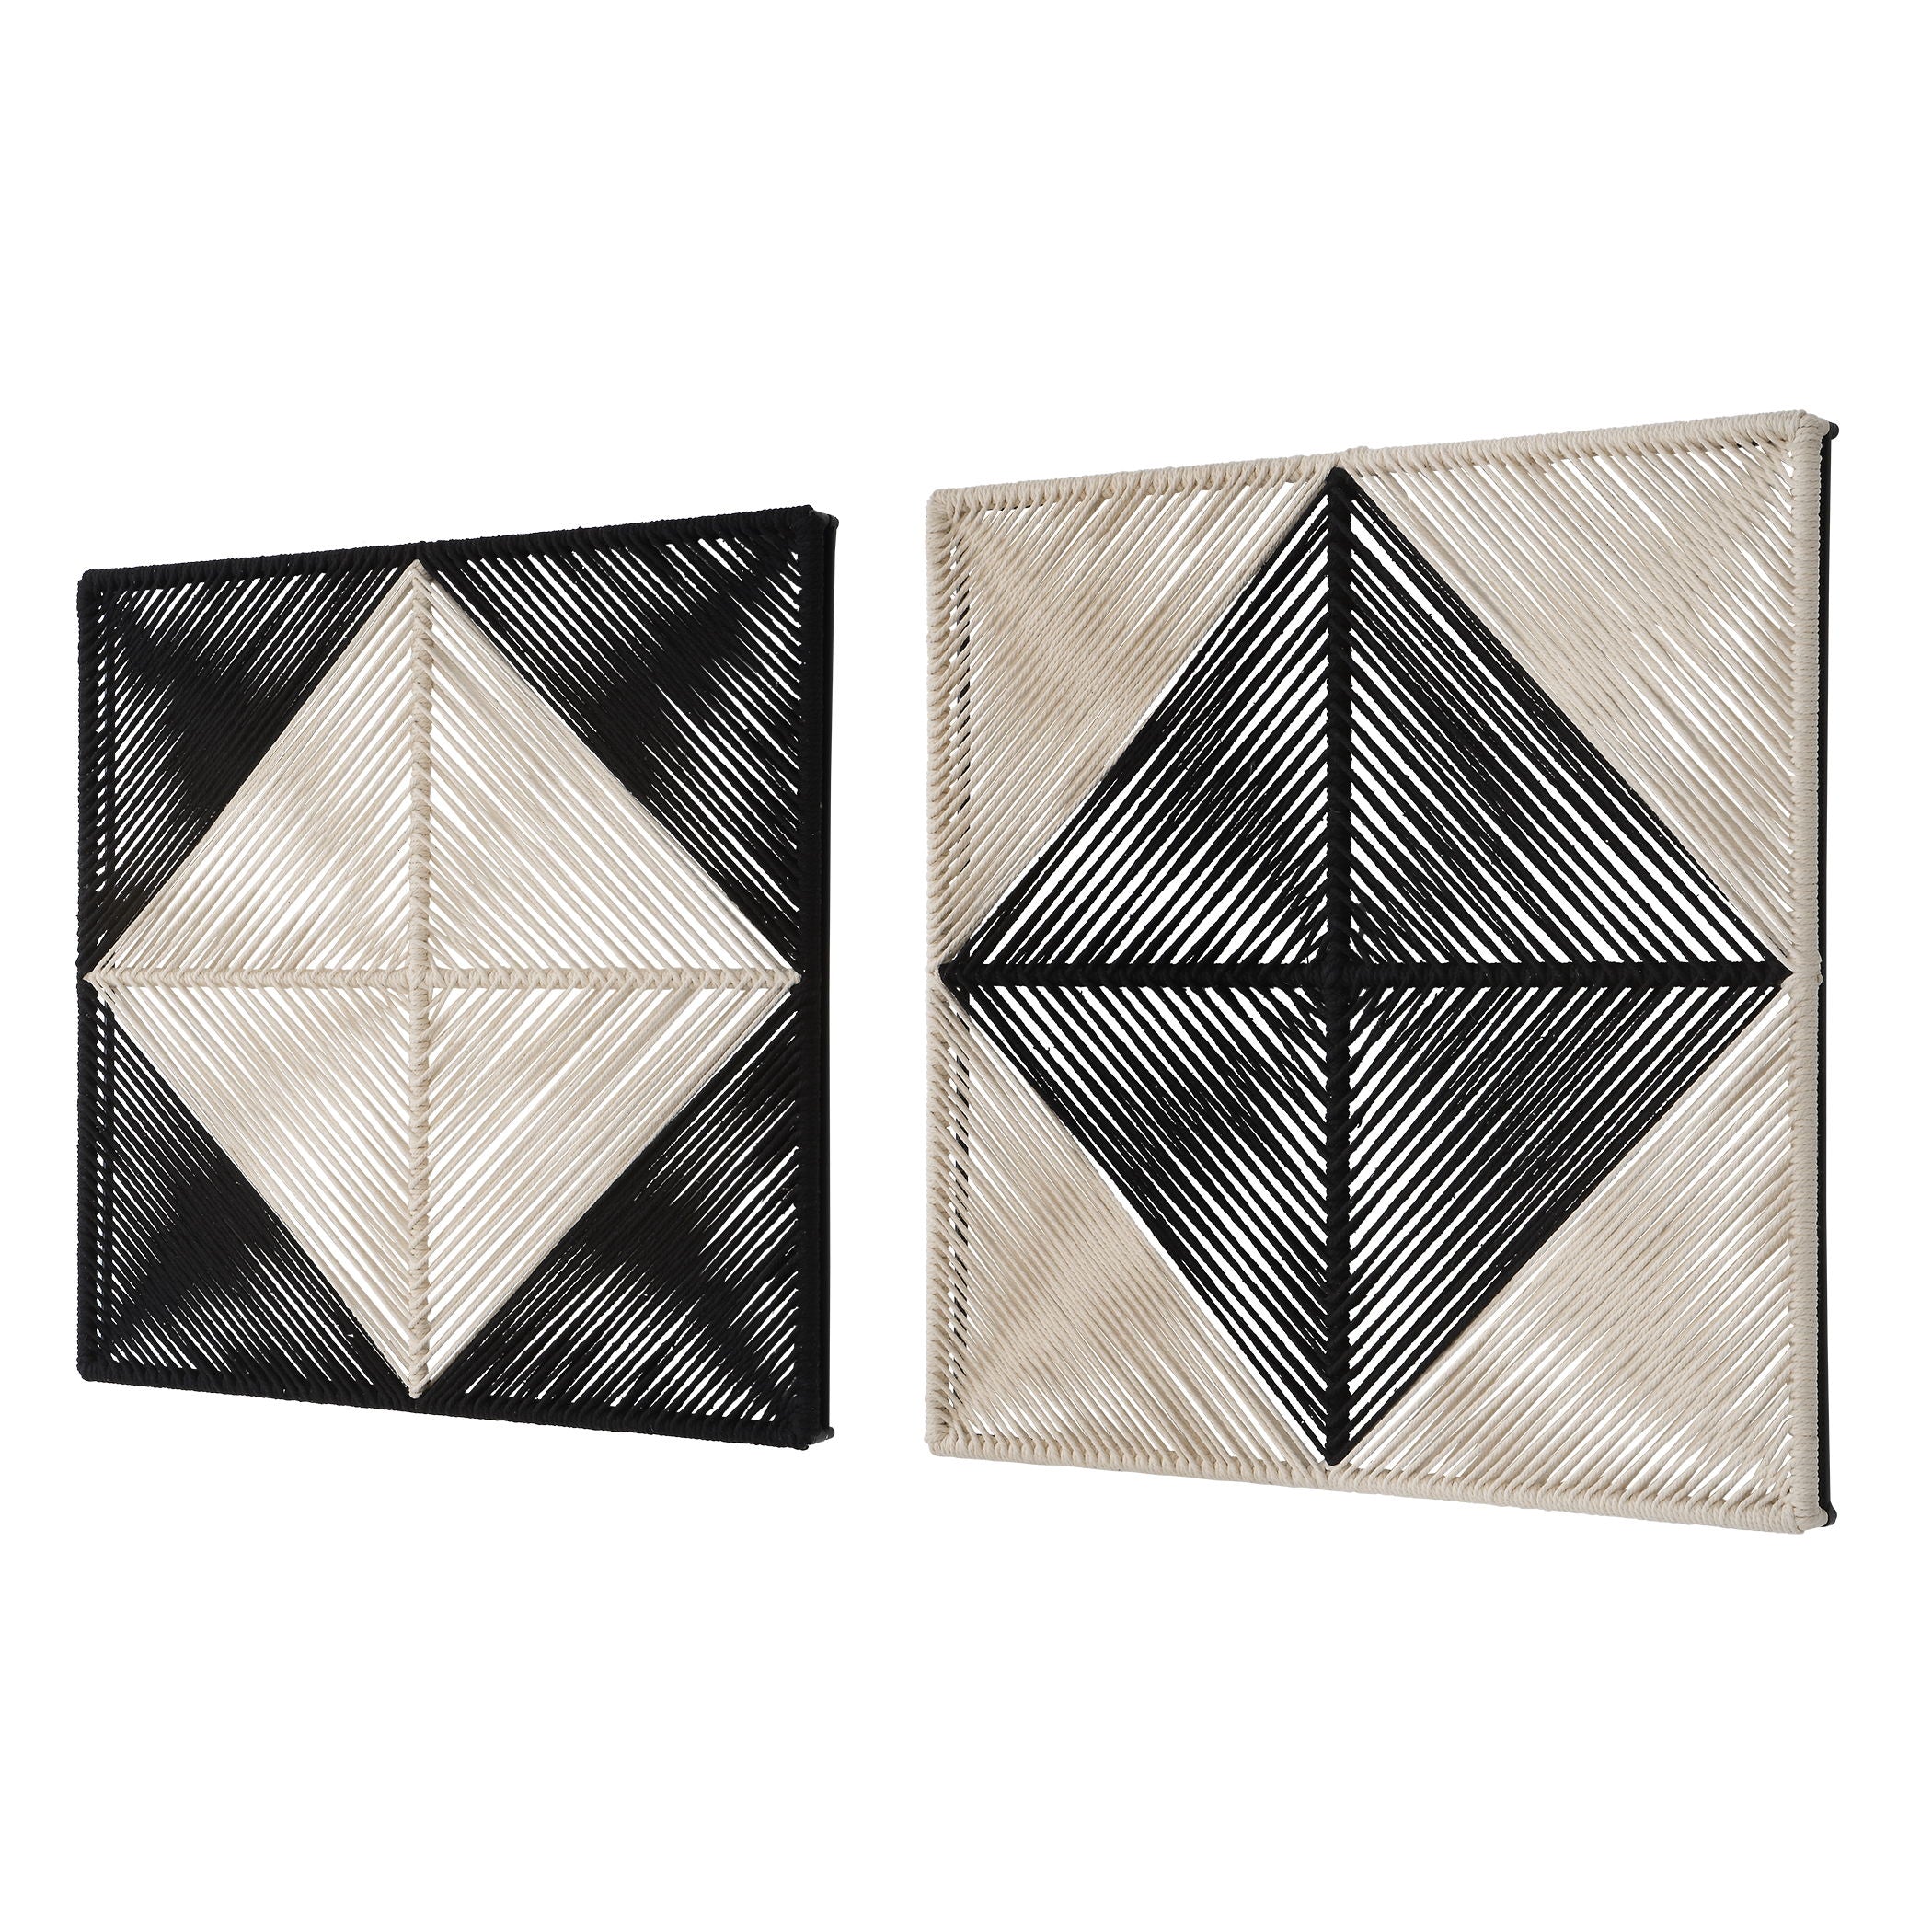 Seeing Double - Rope Wall Squares (Set of 2) - Beige & Black